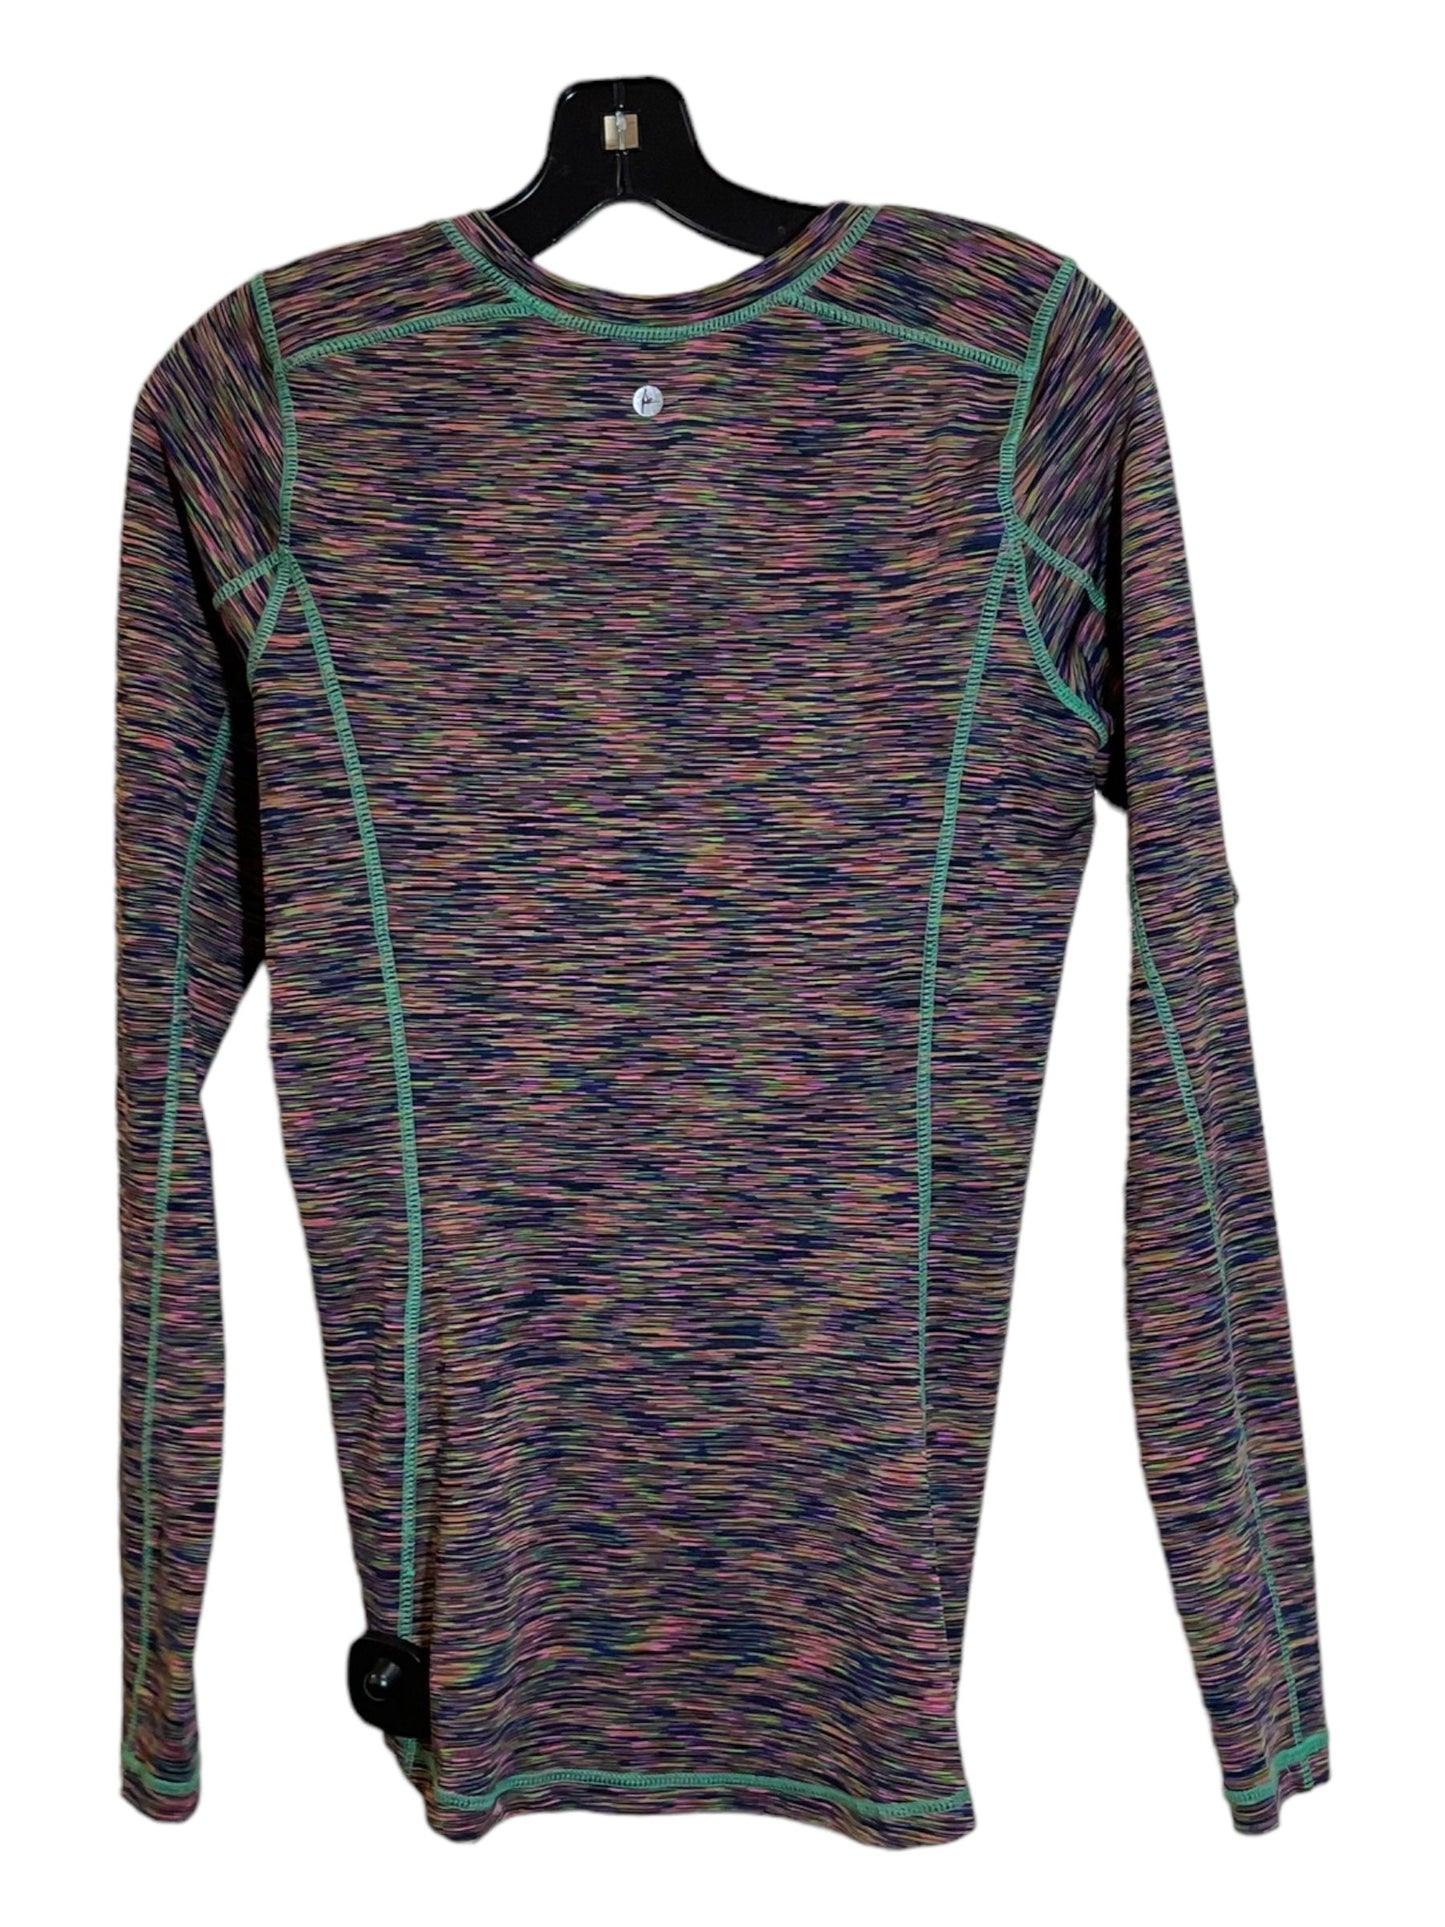 Multi-colored Athletic Top Long Sleeve Crewneck 90 Degrees By Reflex, Size S